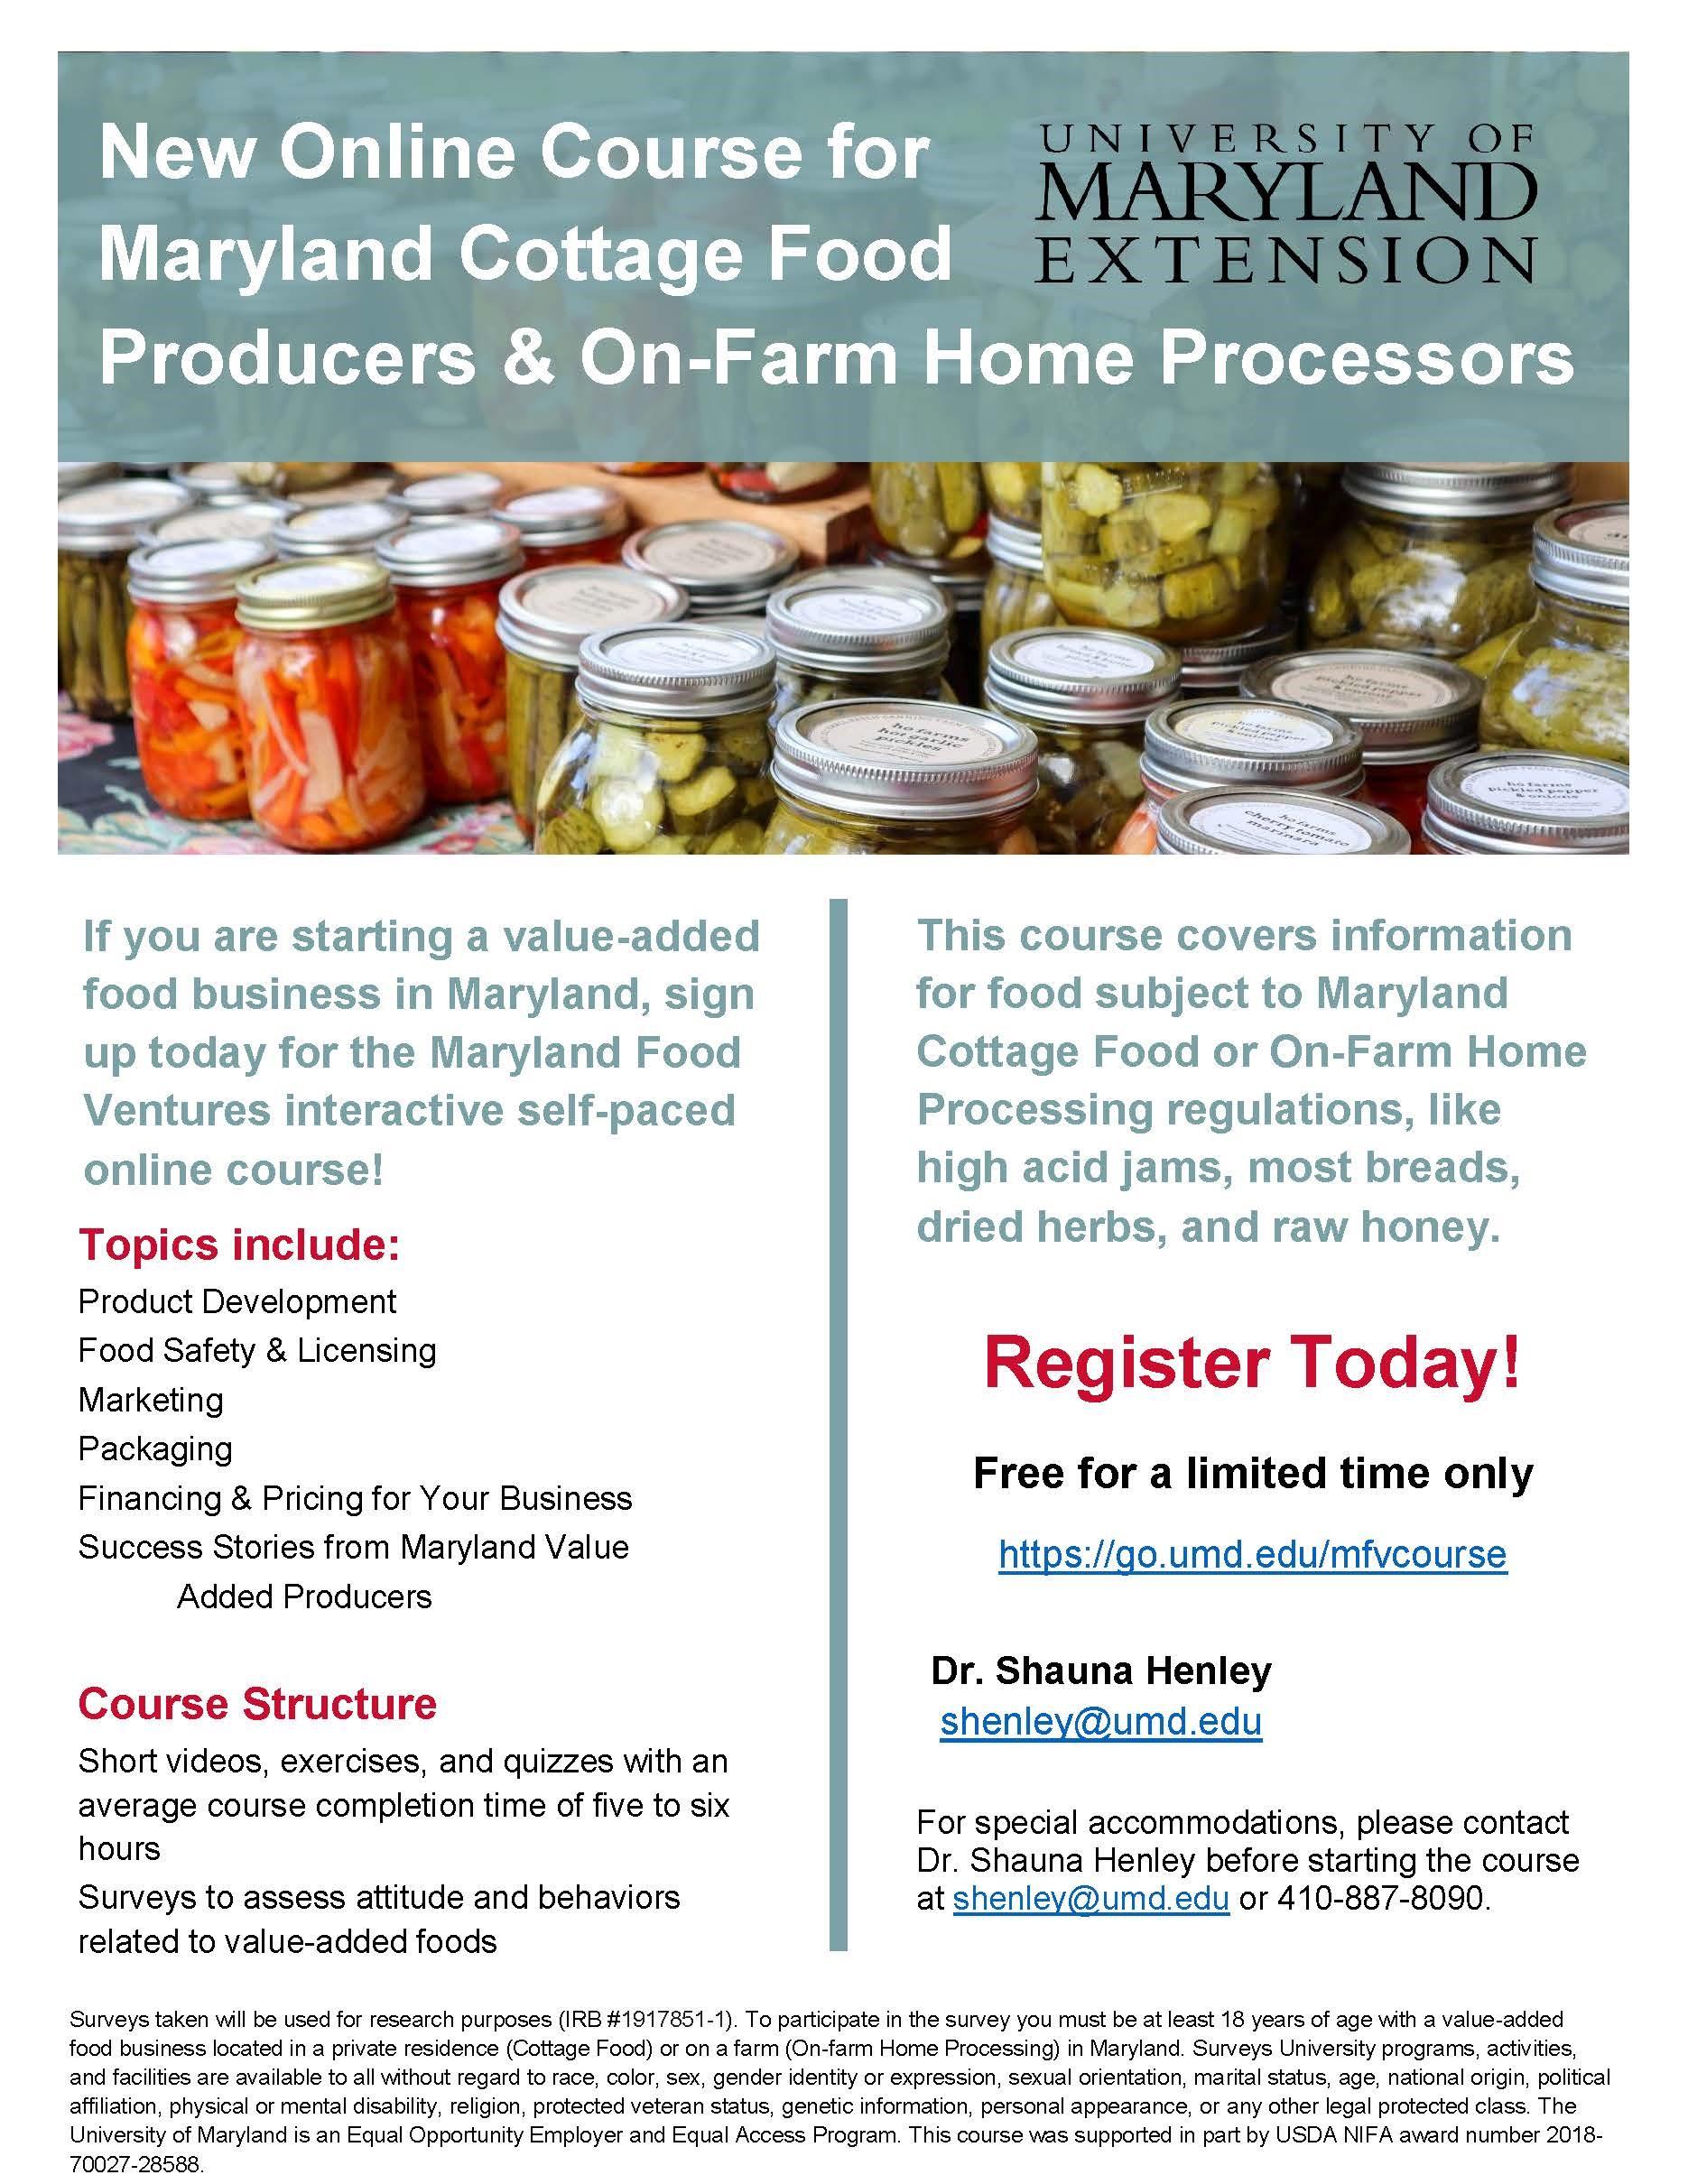 Cottage Food and On-Farm Home processors online course